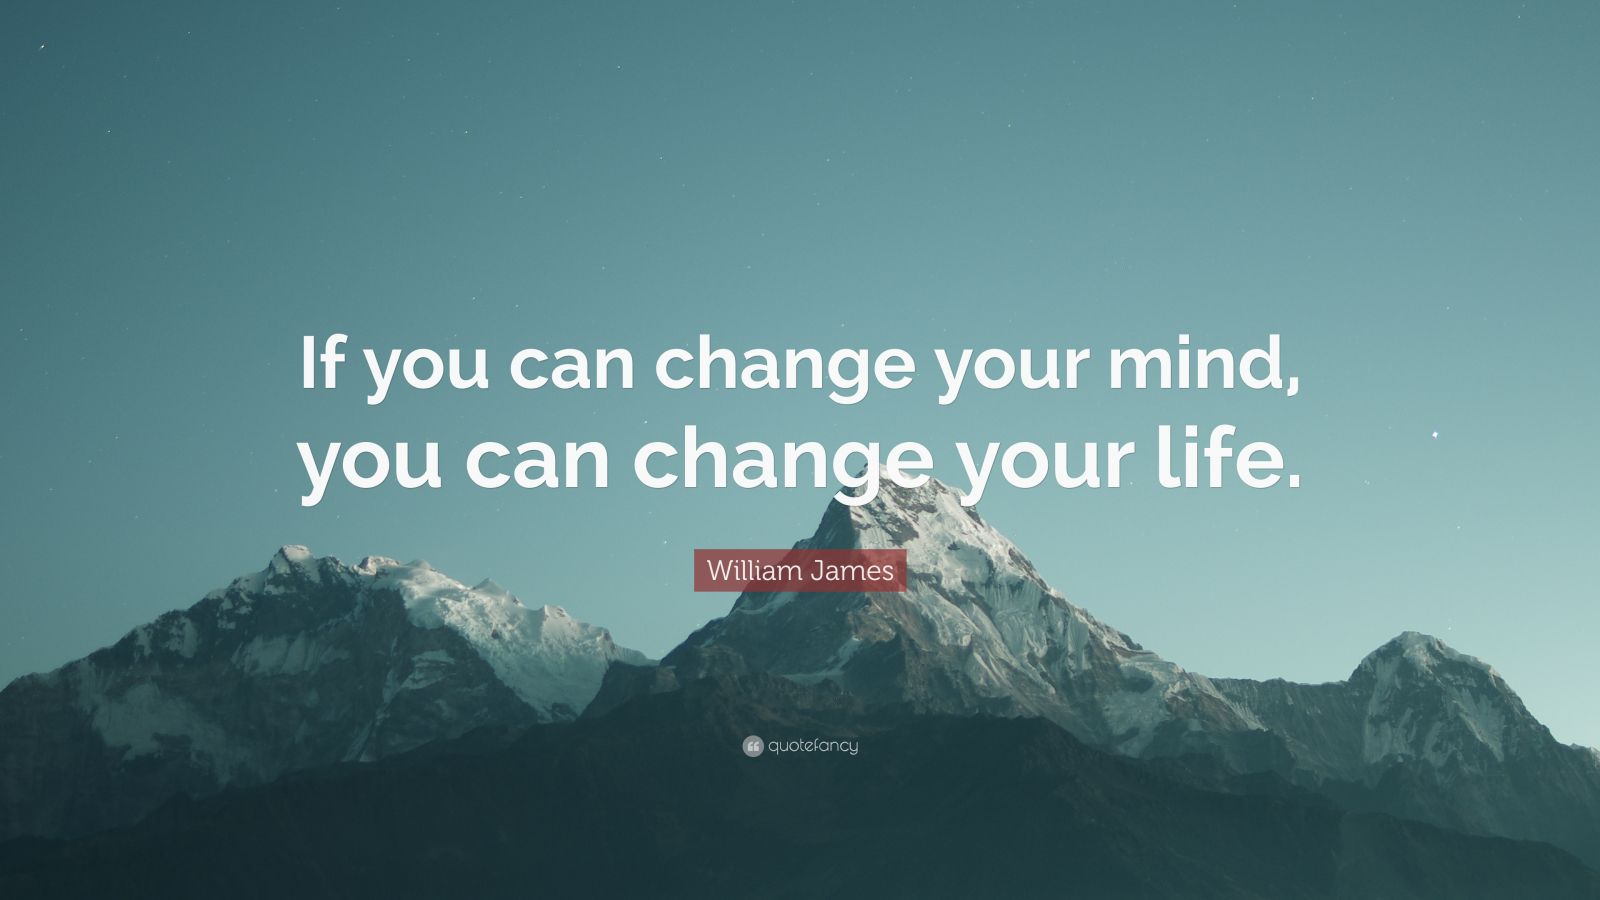 William James Quote: "If you can change your mind, you can change your life." (22 wallpapers ...